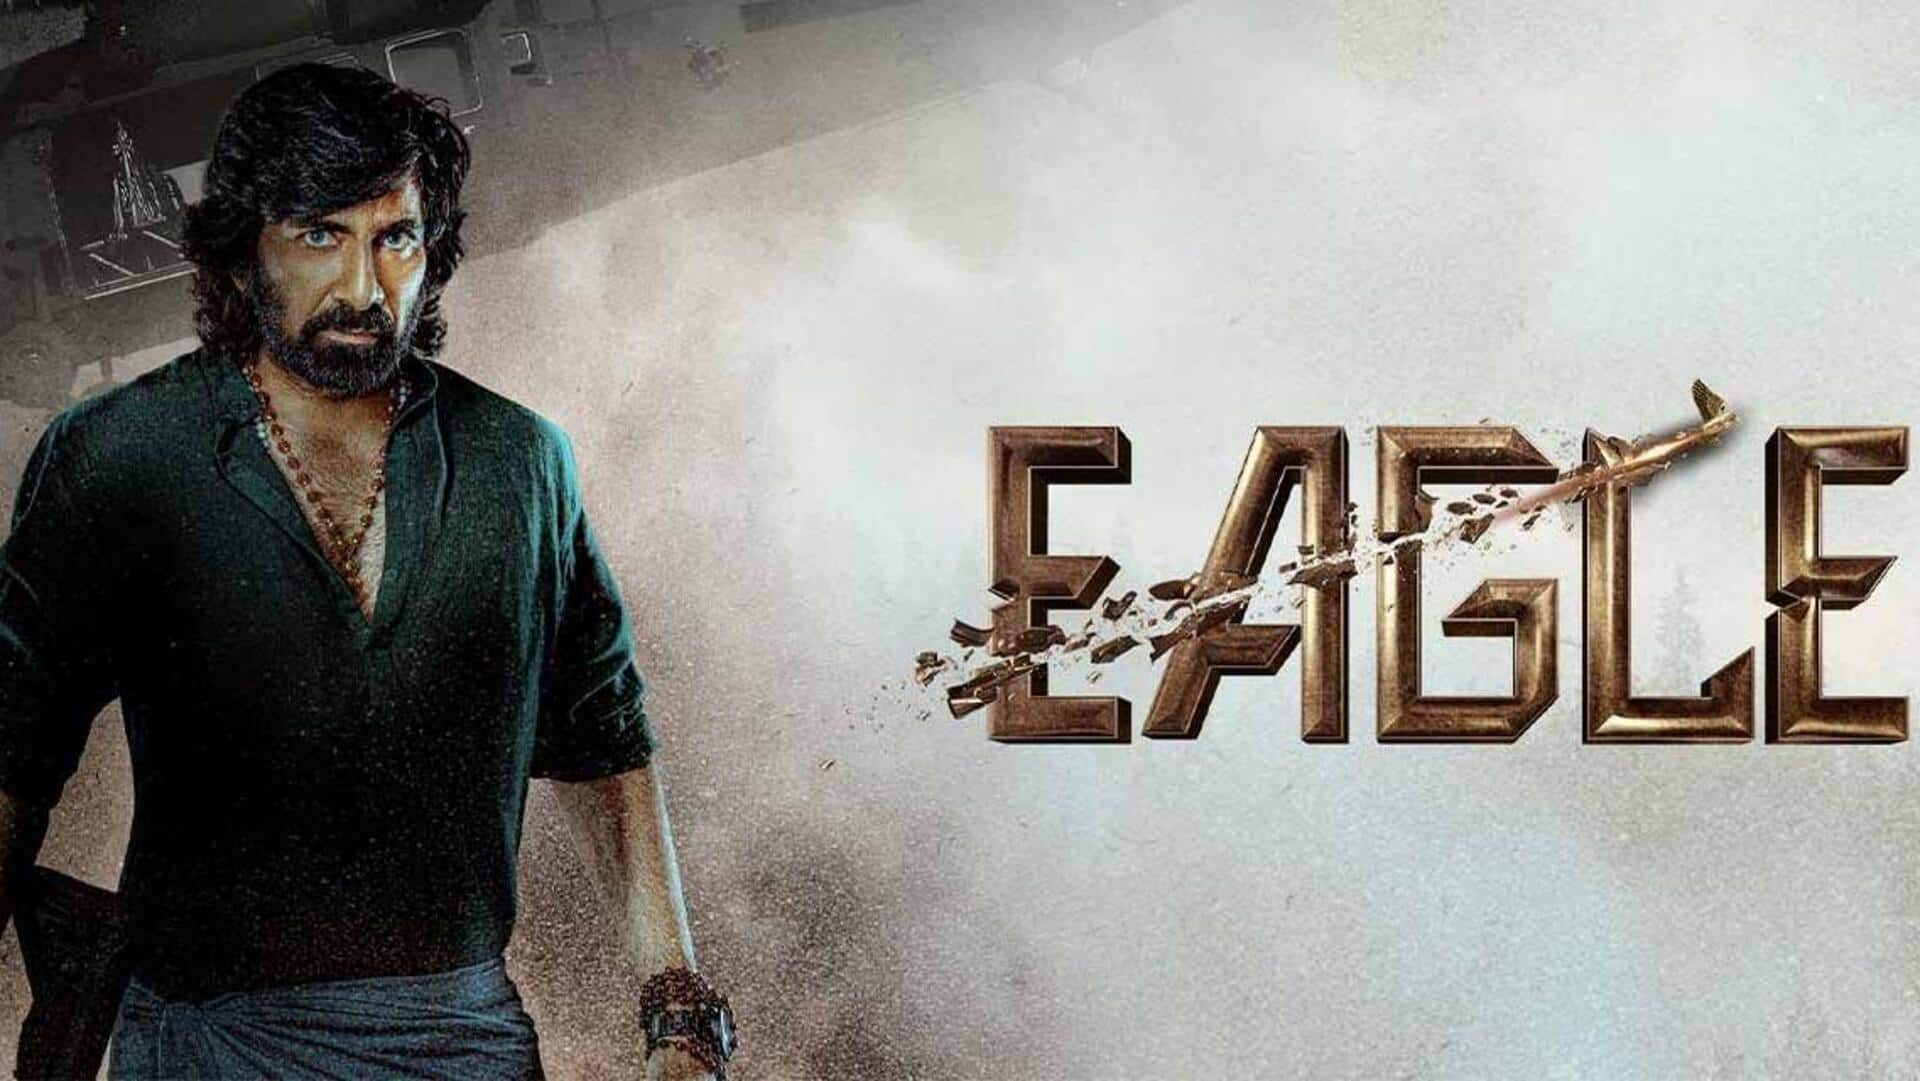 Box office collection: 'Eagle' eyes commercial stability to survive